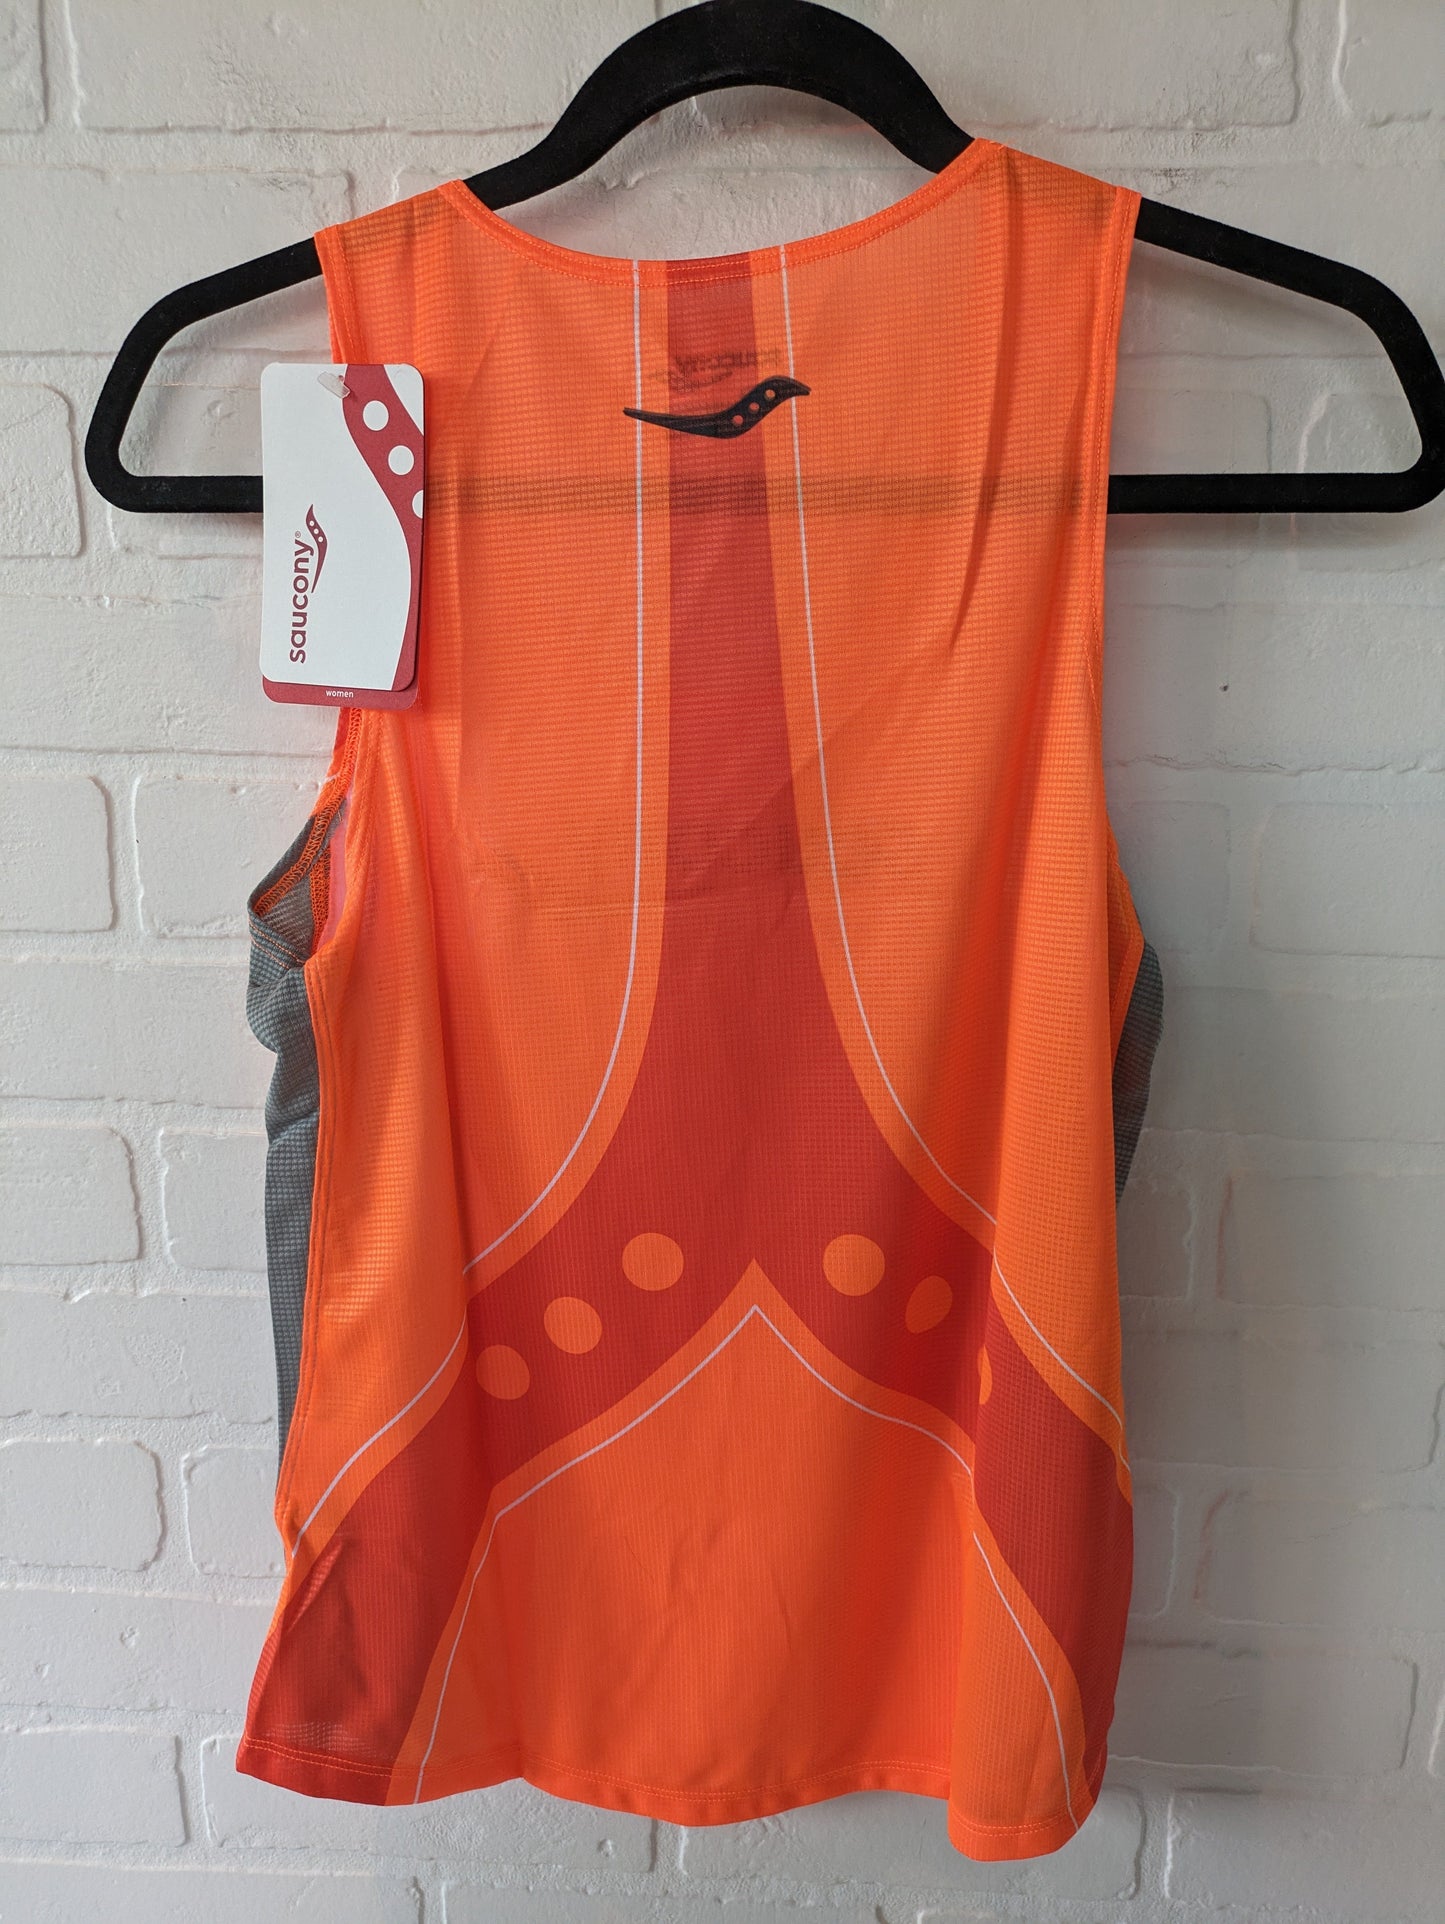 Athletic Tank Top By Saucony  Size: S